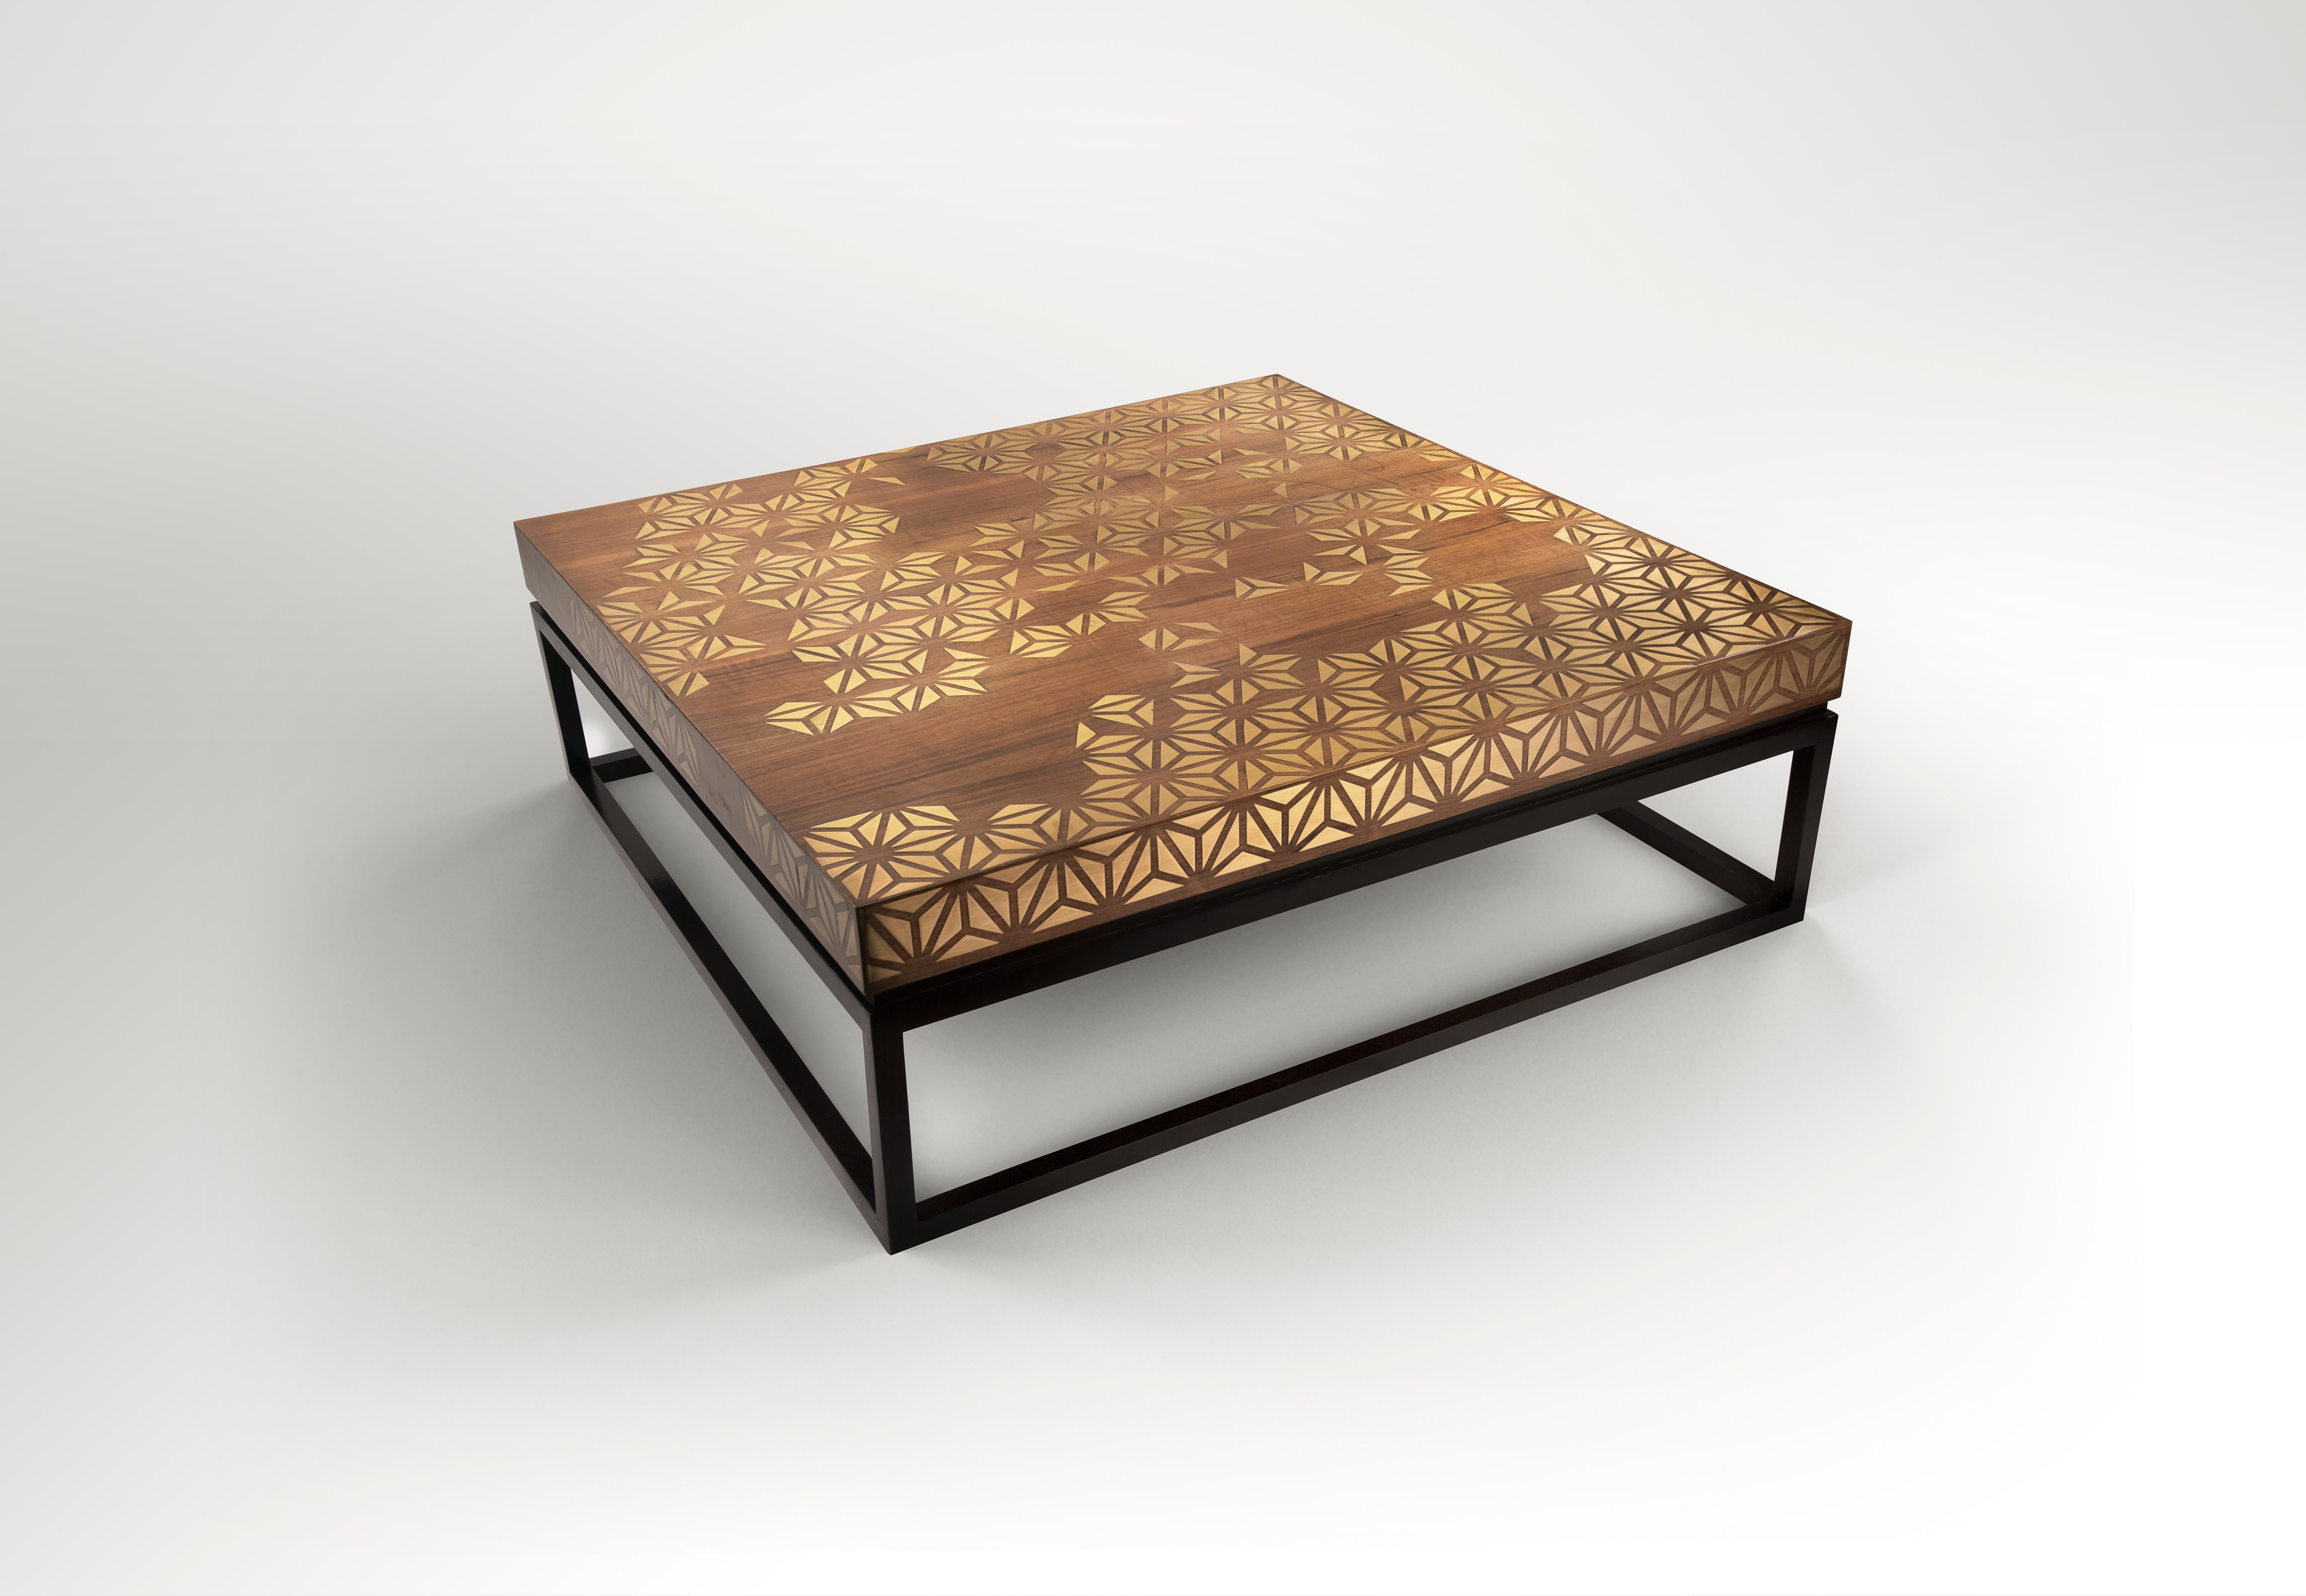 Walnut Coffee Table with Handcrafted Brass Inlay and Black Lacquered Legs. 
Perfection is one of our signature tables where many textures are charmingly infused to make this table a design showpiece. It is made from massive walnut wood infused with